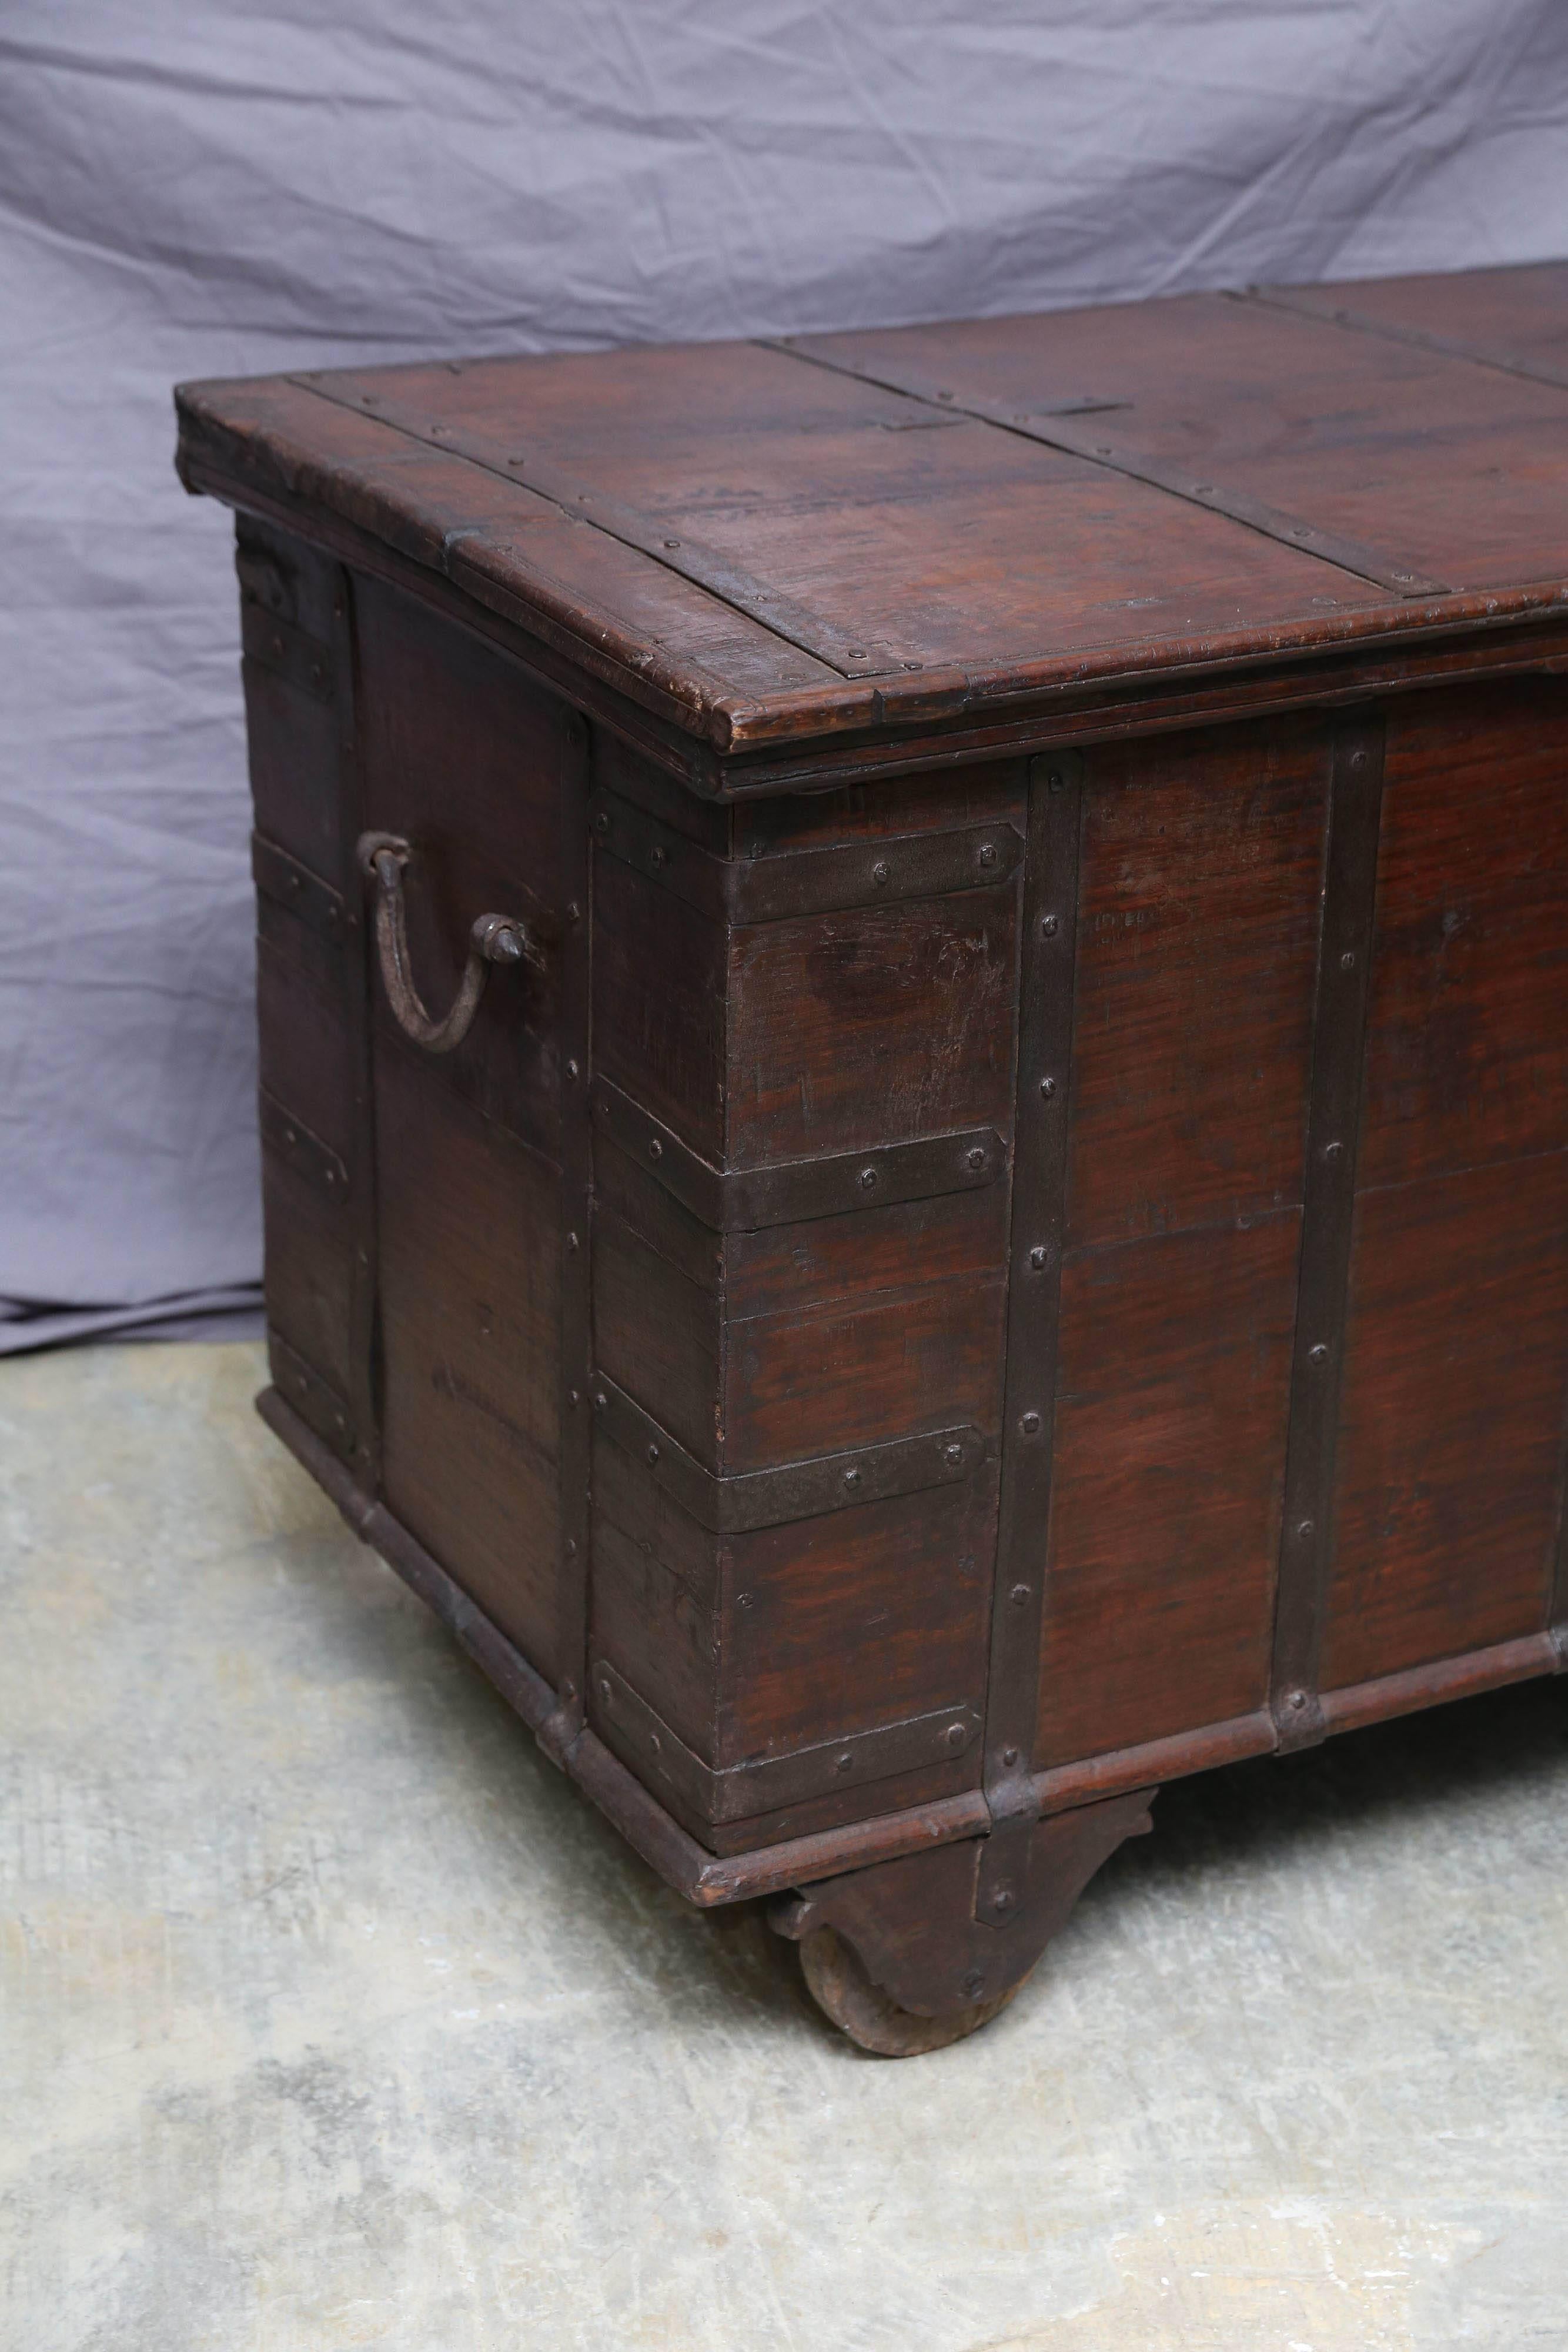 British Colonial 200 Years Old Solid Teak Wood Dowry Chest from a Central Indian Home For Sale